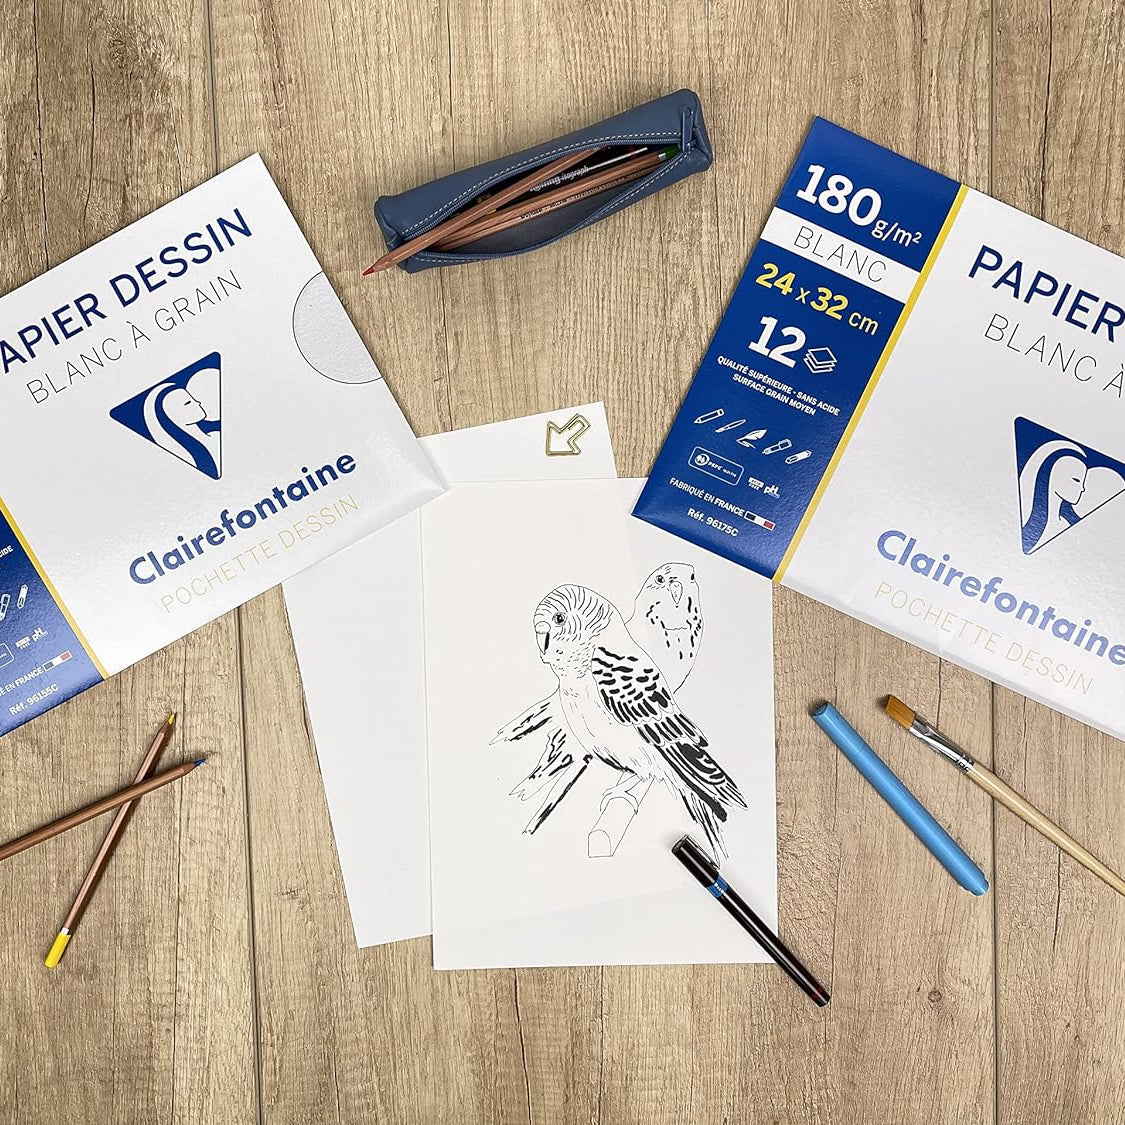 CLAIREFONTAINE White Grained Drawing Paper A4 180g 12s